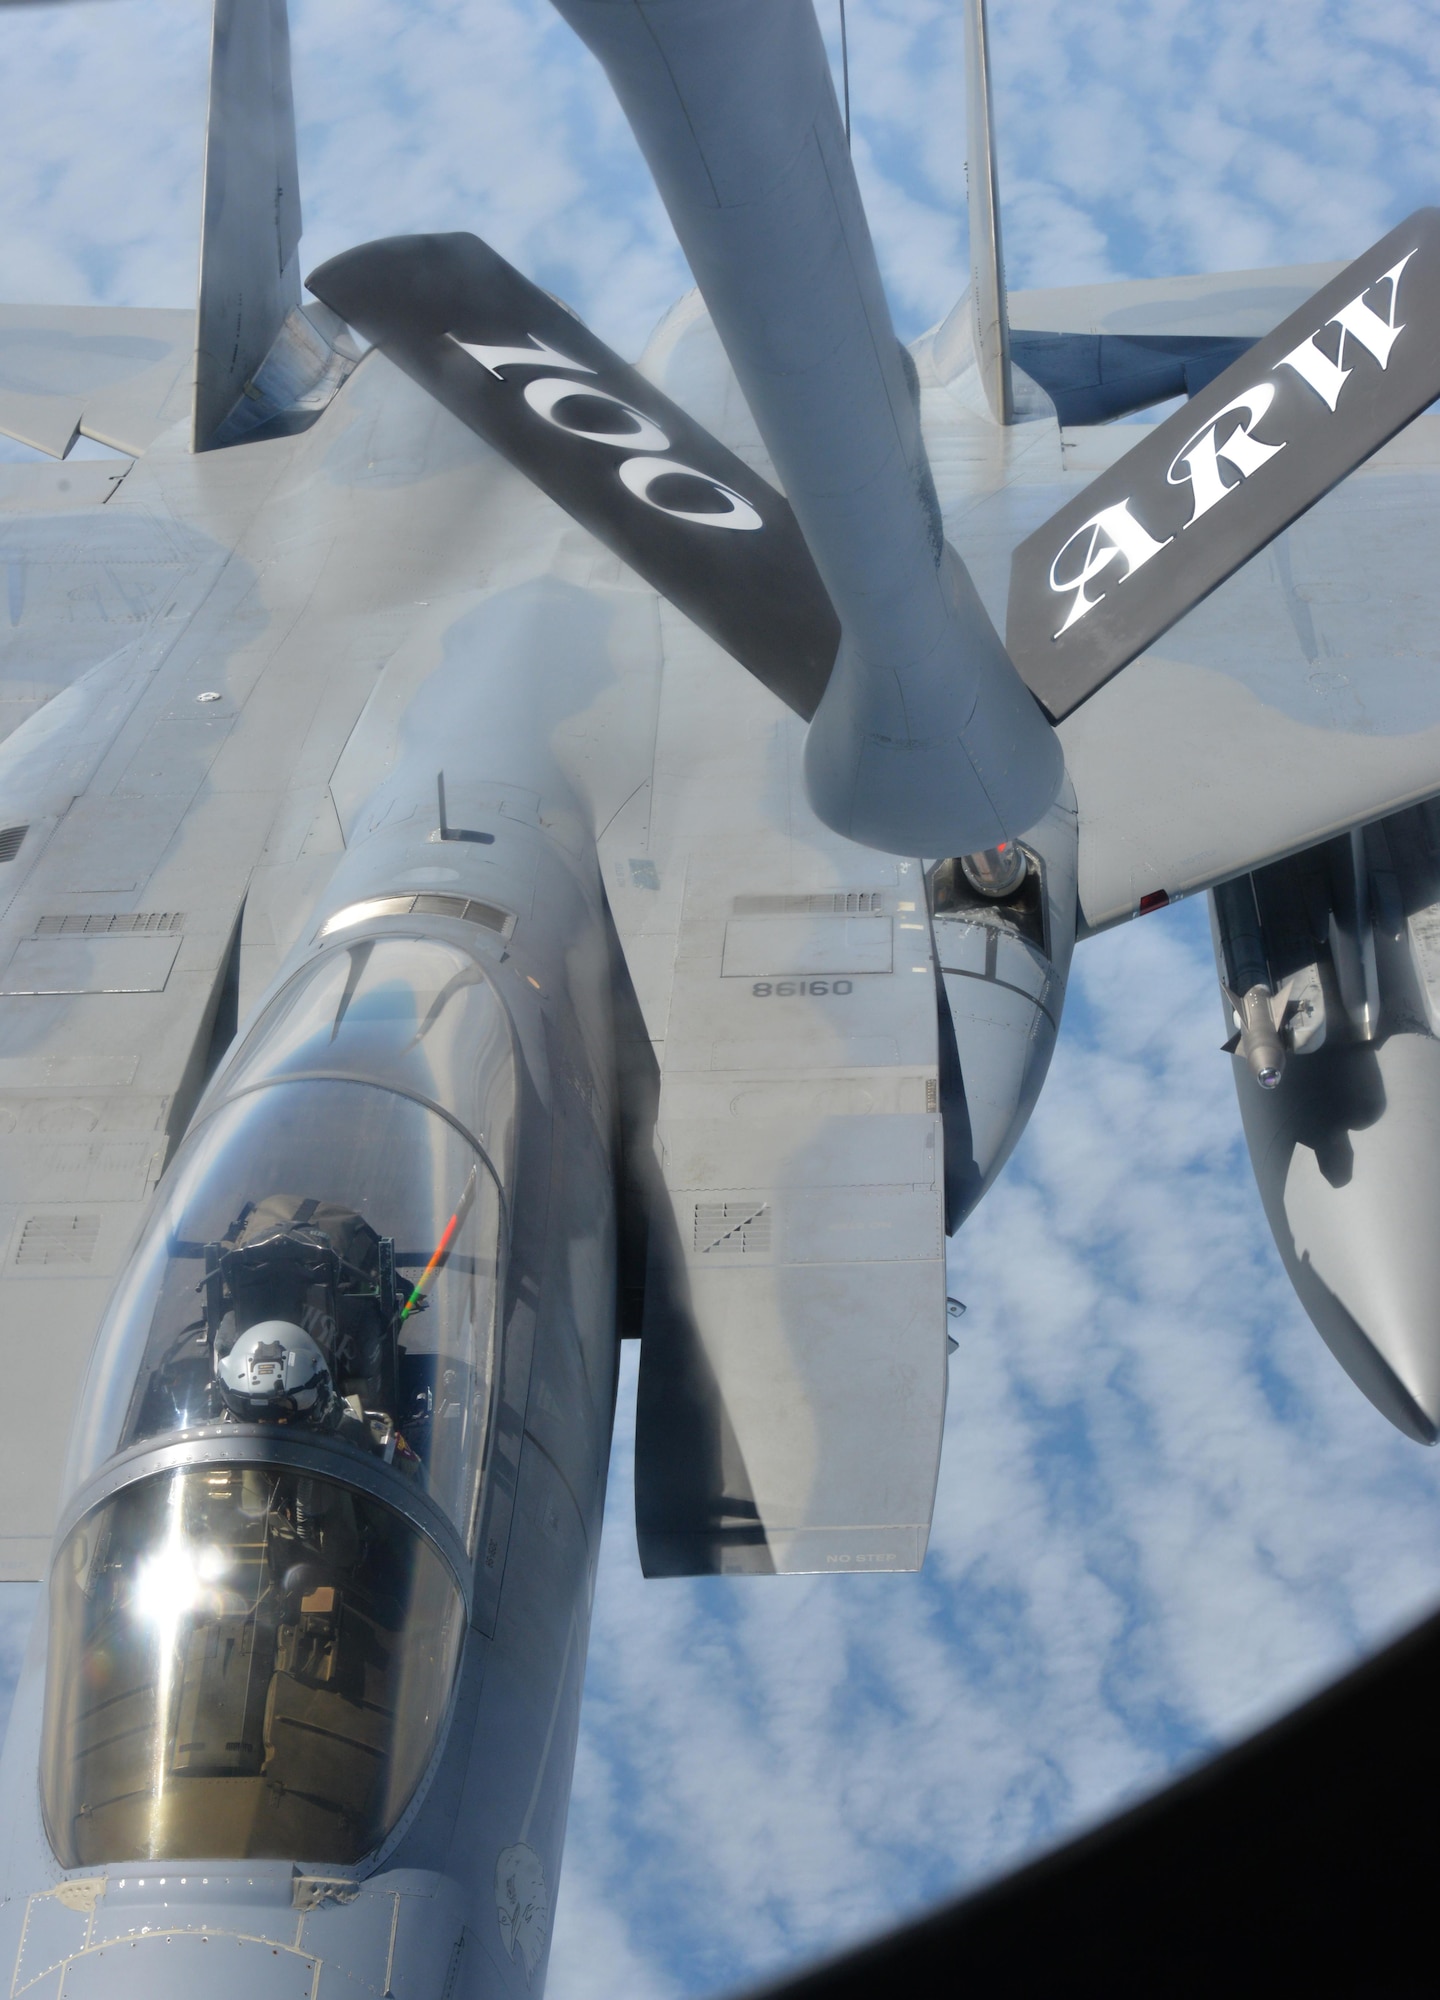 An F-15 Eagle from RAF Lakenheath, England, receives fuel from a KC-135 Stratotanker May 19, 2017. The KC-135 is assigned to RAF Mildenhall, England. Both aircraft are on their way to support Arctic Challenge 2017, a multinational exercise encompassing 11 nations and more than 100 aircraft. (U.S. Air Force photo by Tech. Sgt. David Dobrydney)